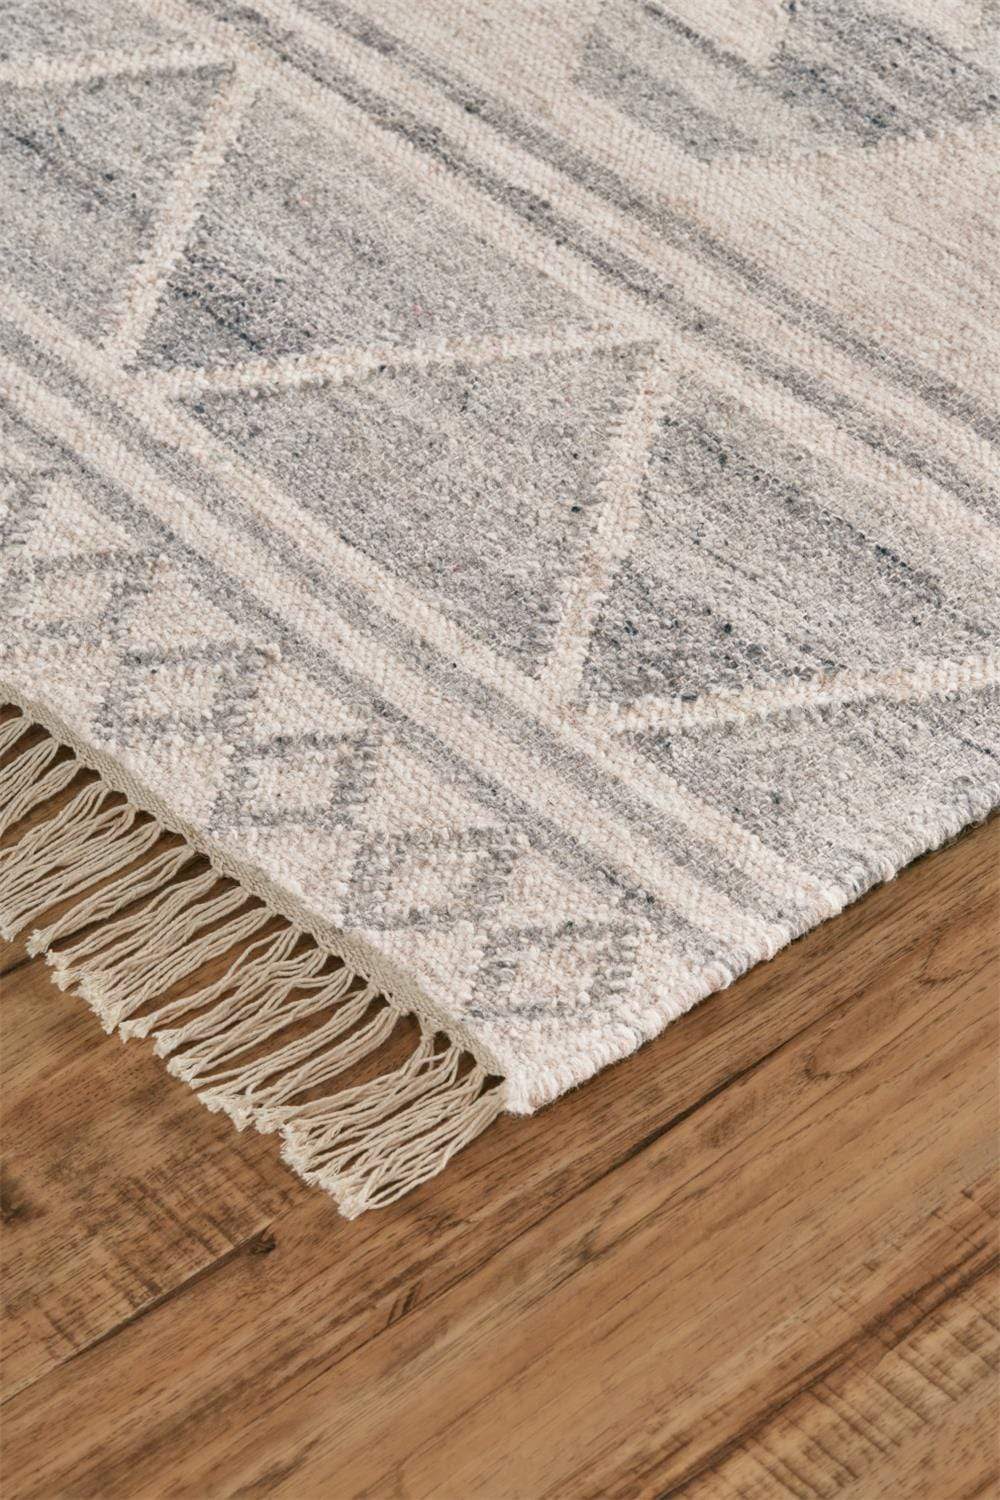 Feizy Feizy Savona Bohemian Geometric Flatweave Rug - Vapor Gray & Ivory - Available in 5 Sizes